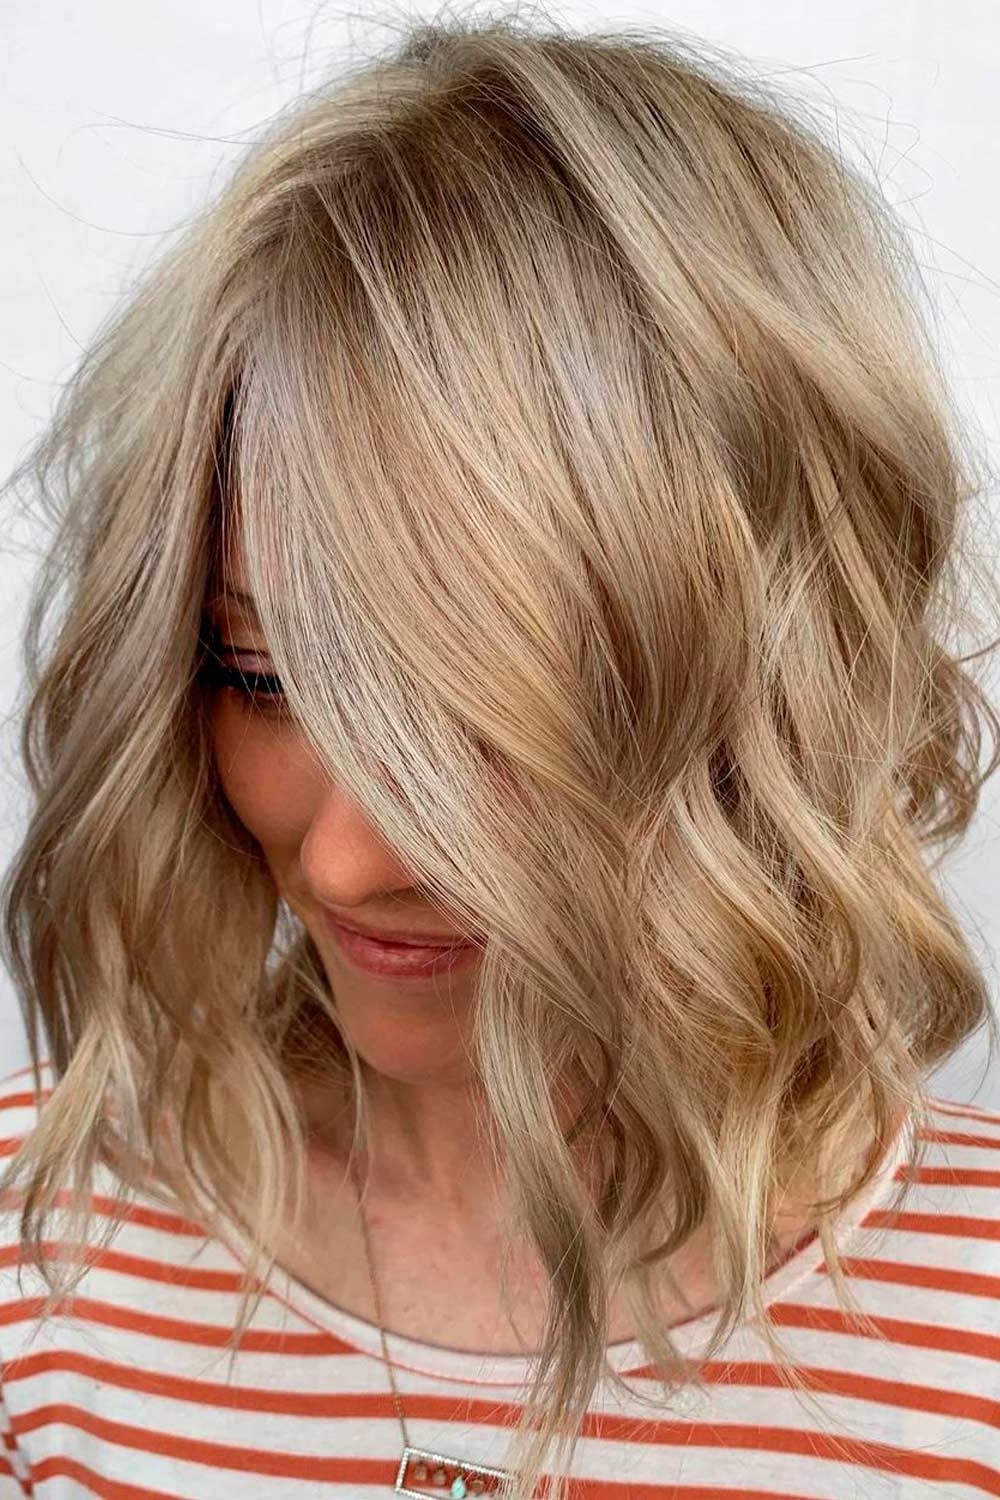 Untraditional Lob Haircut Ideas To Give A Try | Lovehairstyles Regarding Most Current A Line Blonde Wavy Lob Haircuts (View 6 of 25)